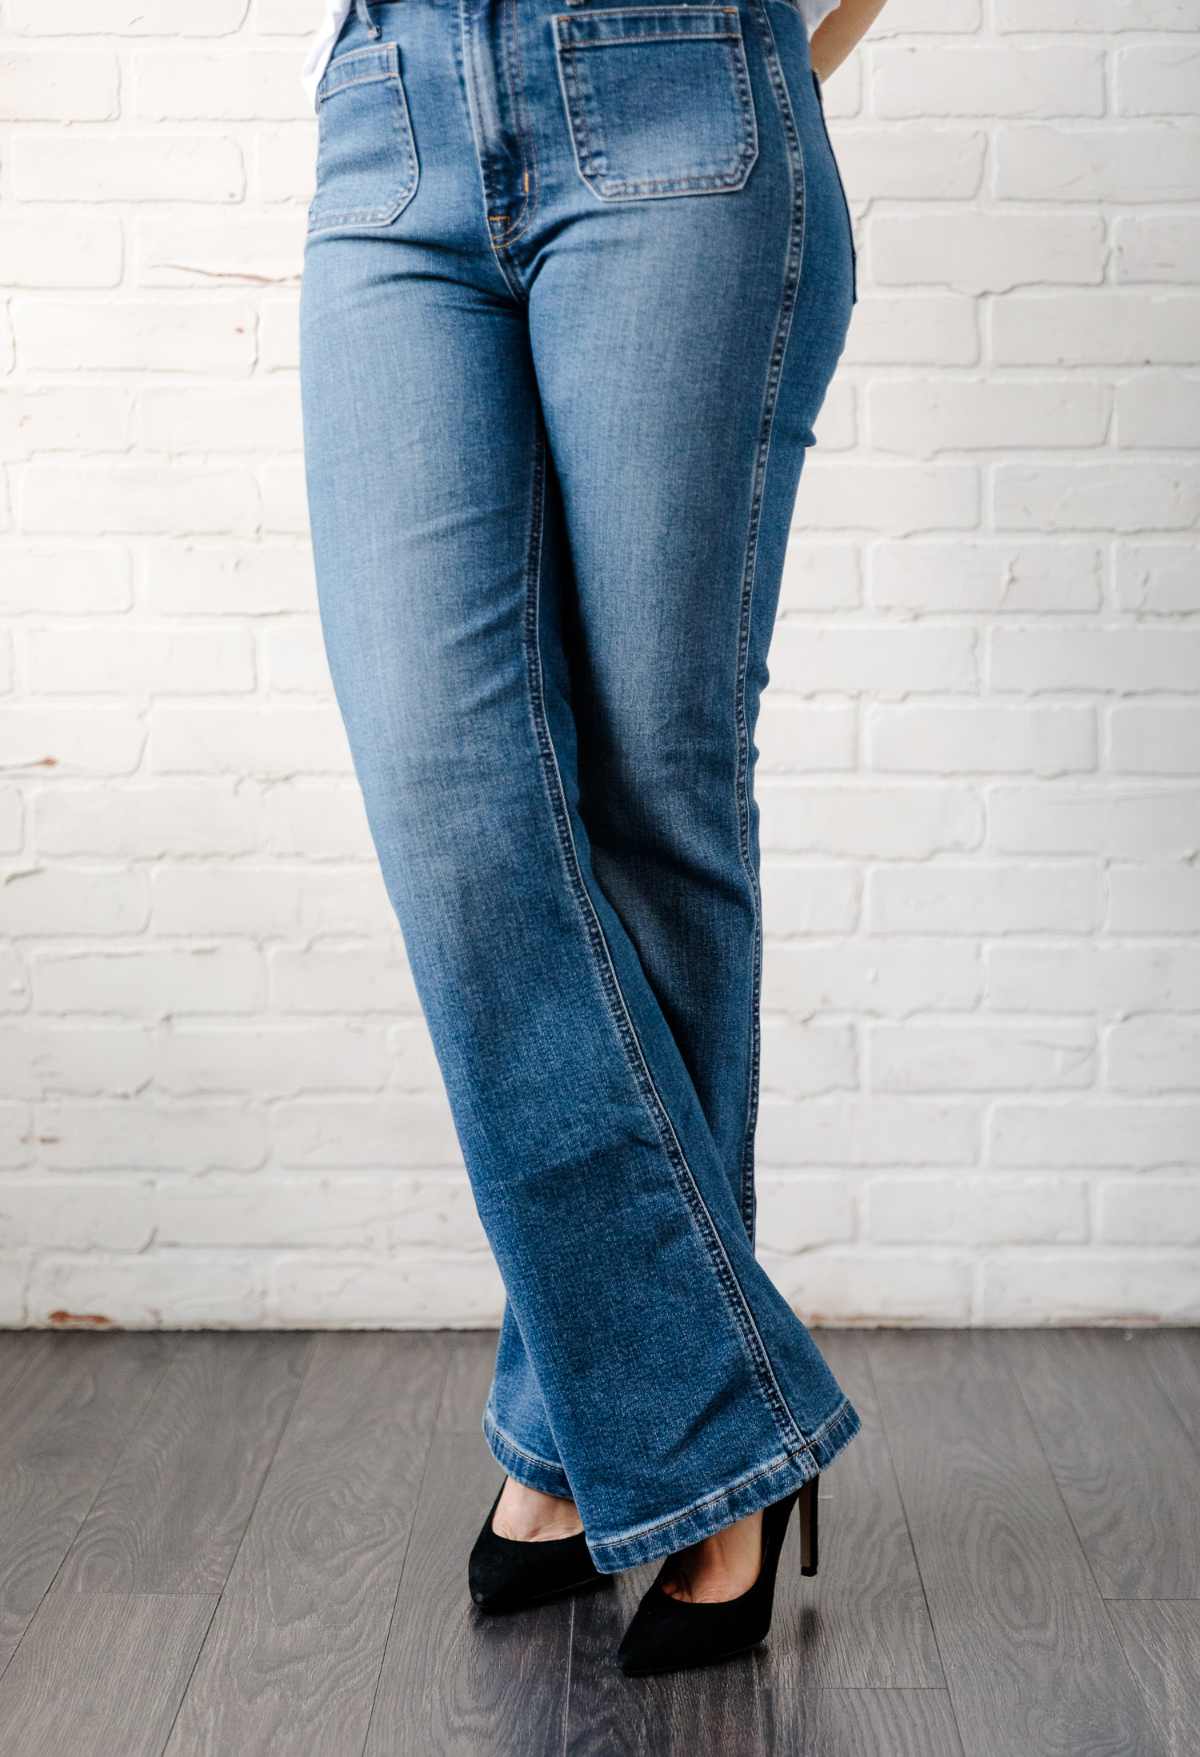 Close of up woman's legs wearing blue flared jeans with black stiletto heel pumps.